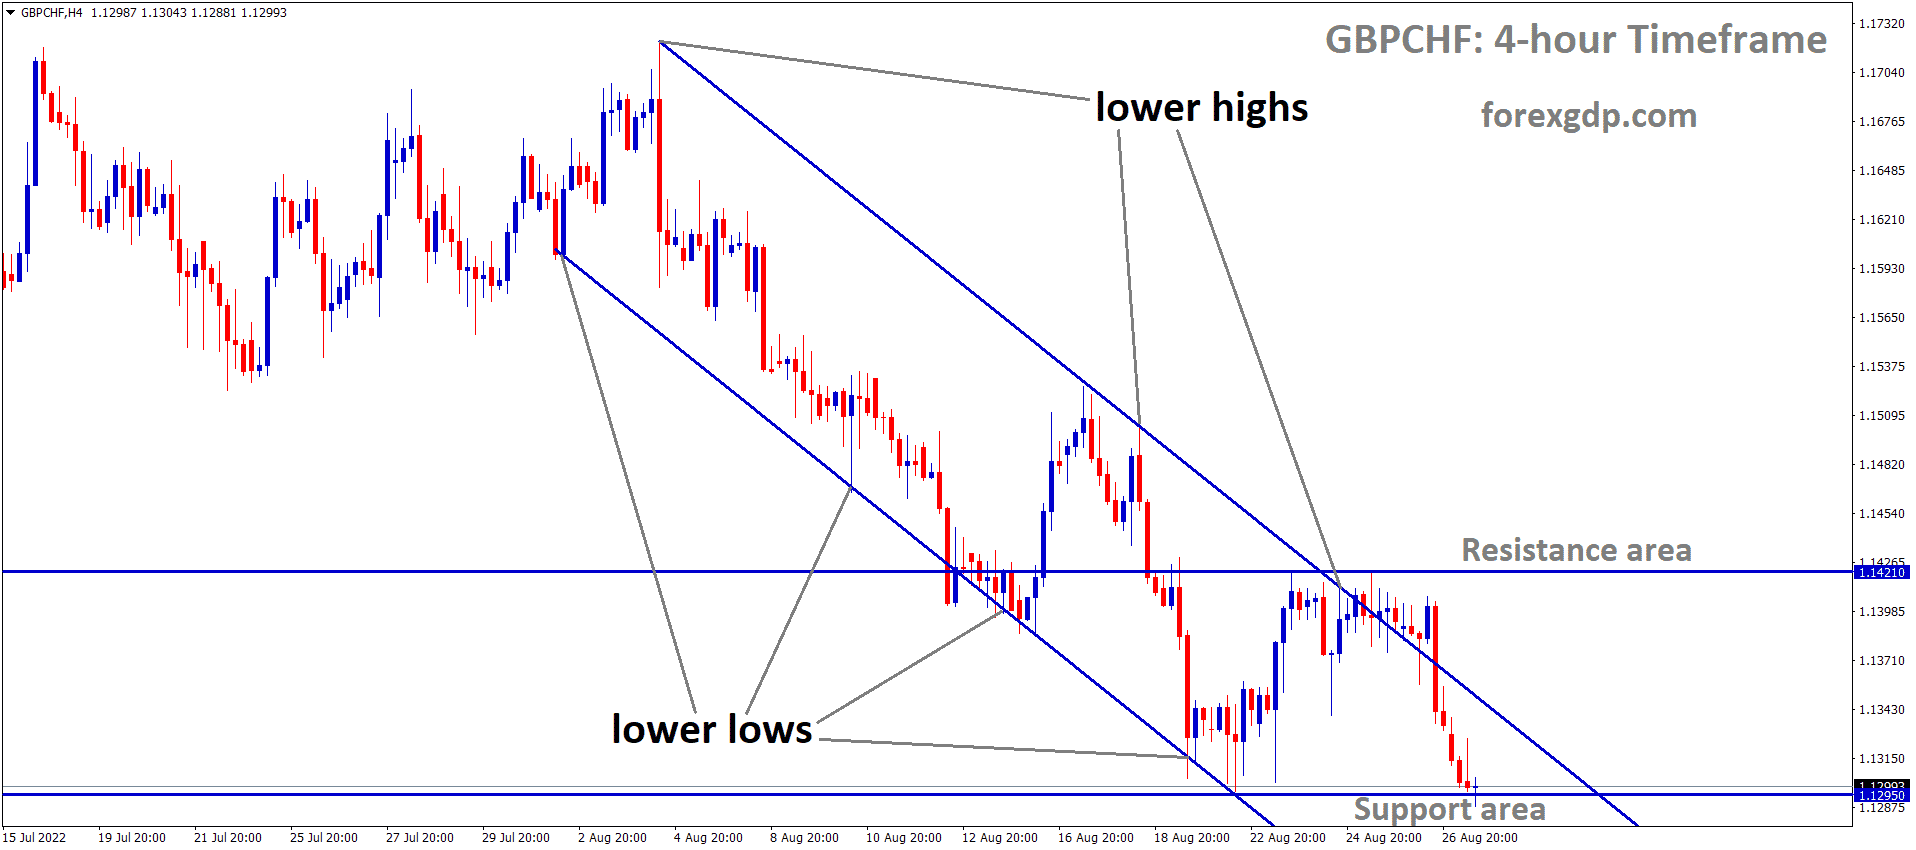 GBPCHF is moving in the Descending channel and the market has fallen from the